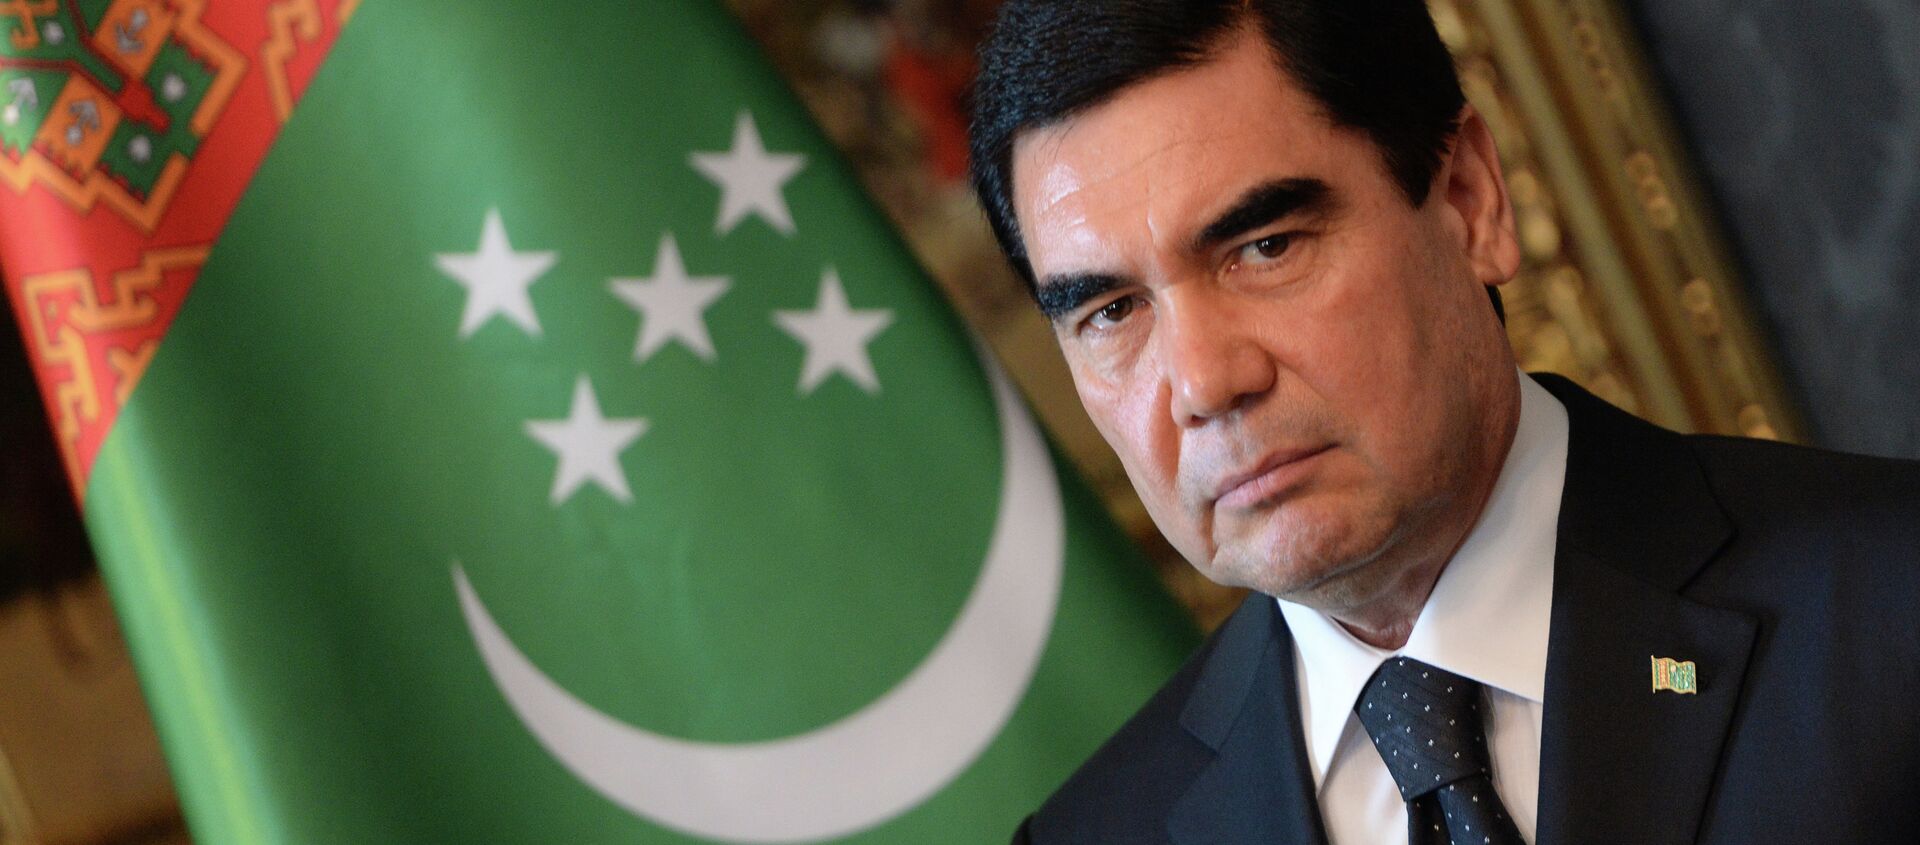 Turkmenistan's President Gurbanguly Berdimuhamedov is pictured during a signing ceremony in the Blue Hall at the presidential palace in Budapest on June 18, 2014 - Sputnik International, 1920, 19.09.2020